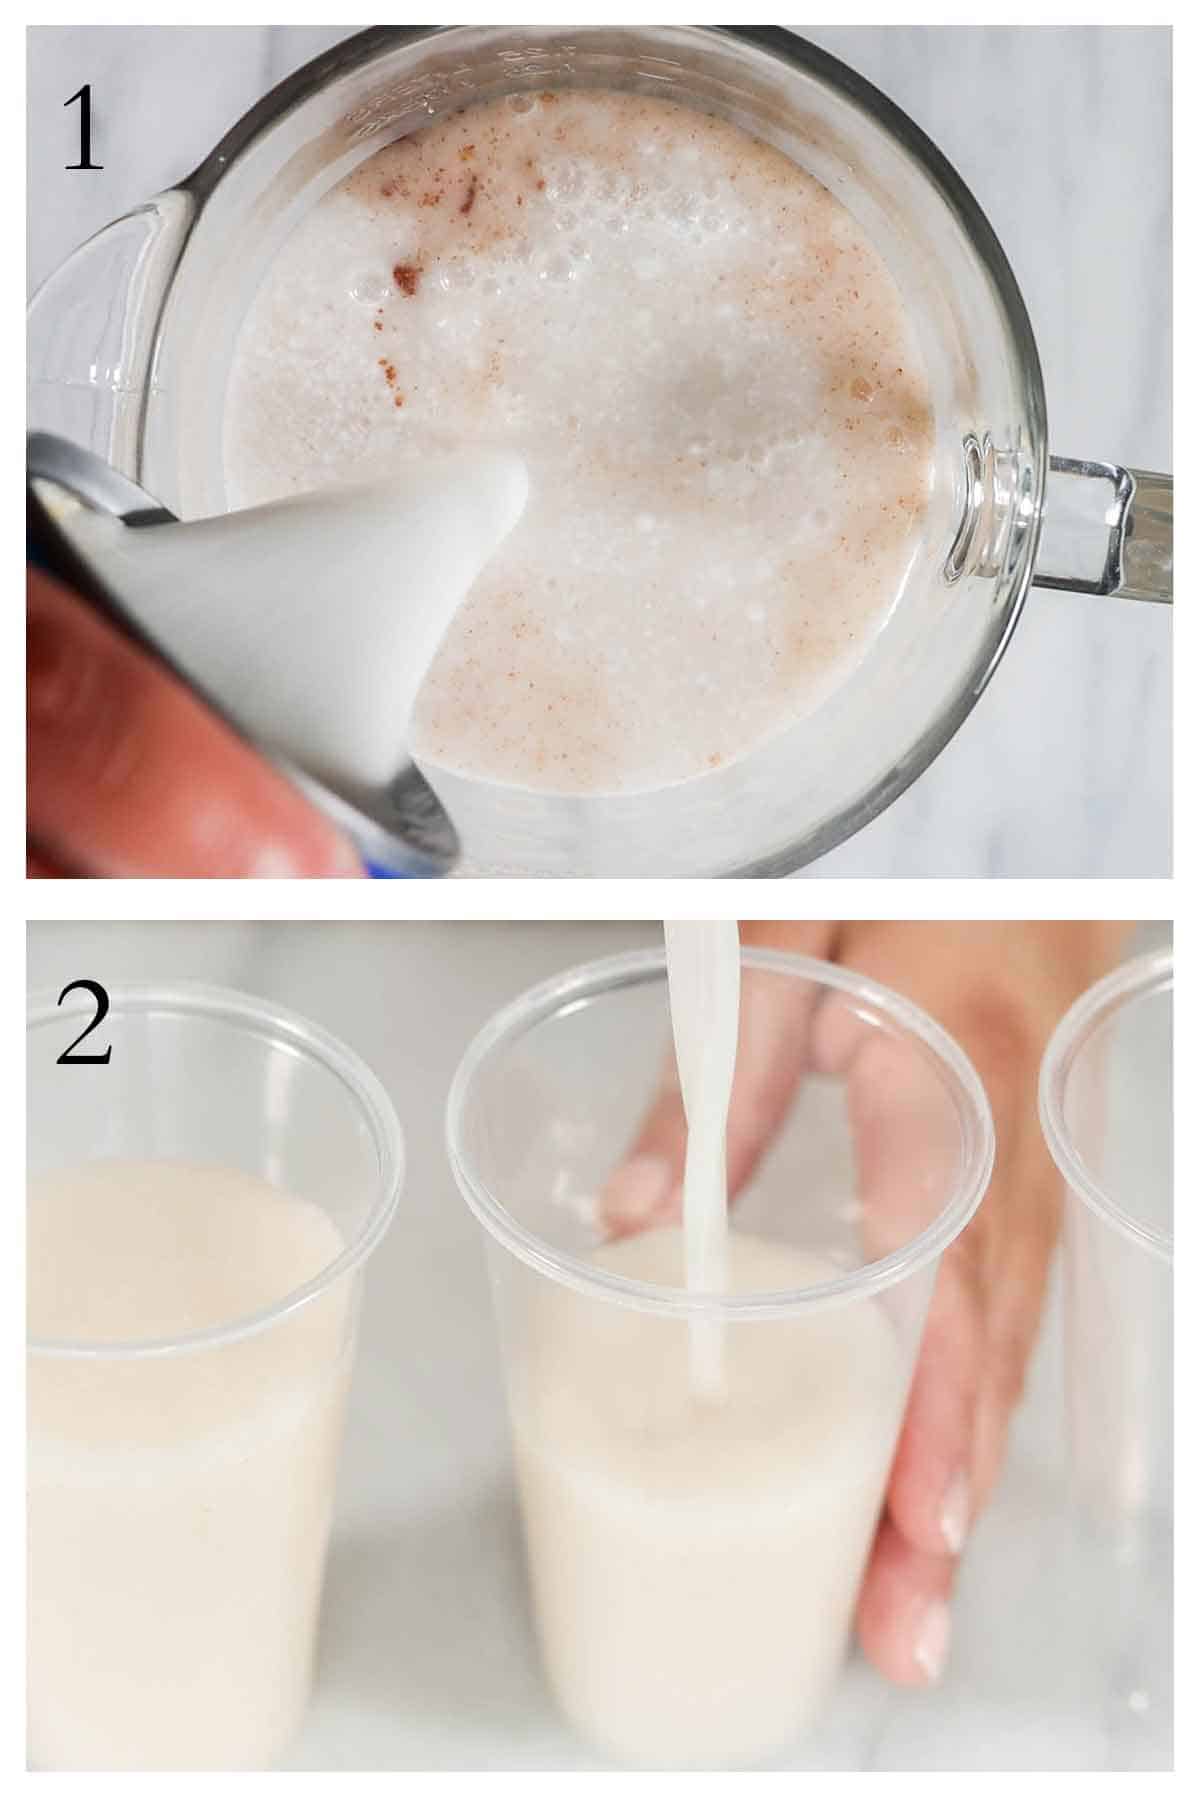 steps 1 and 2 on how to make a coconut limber.